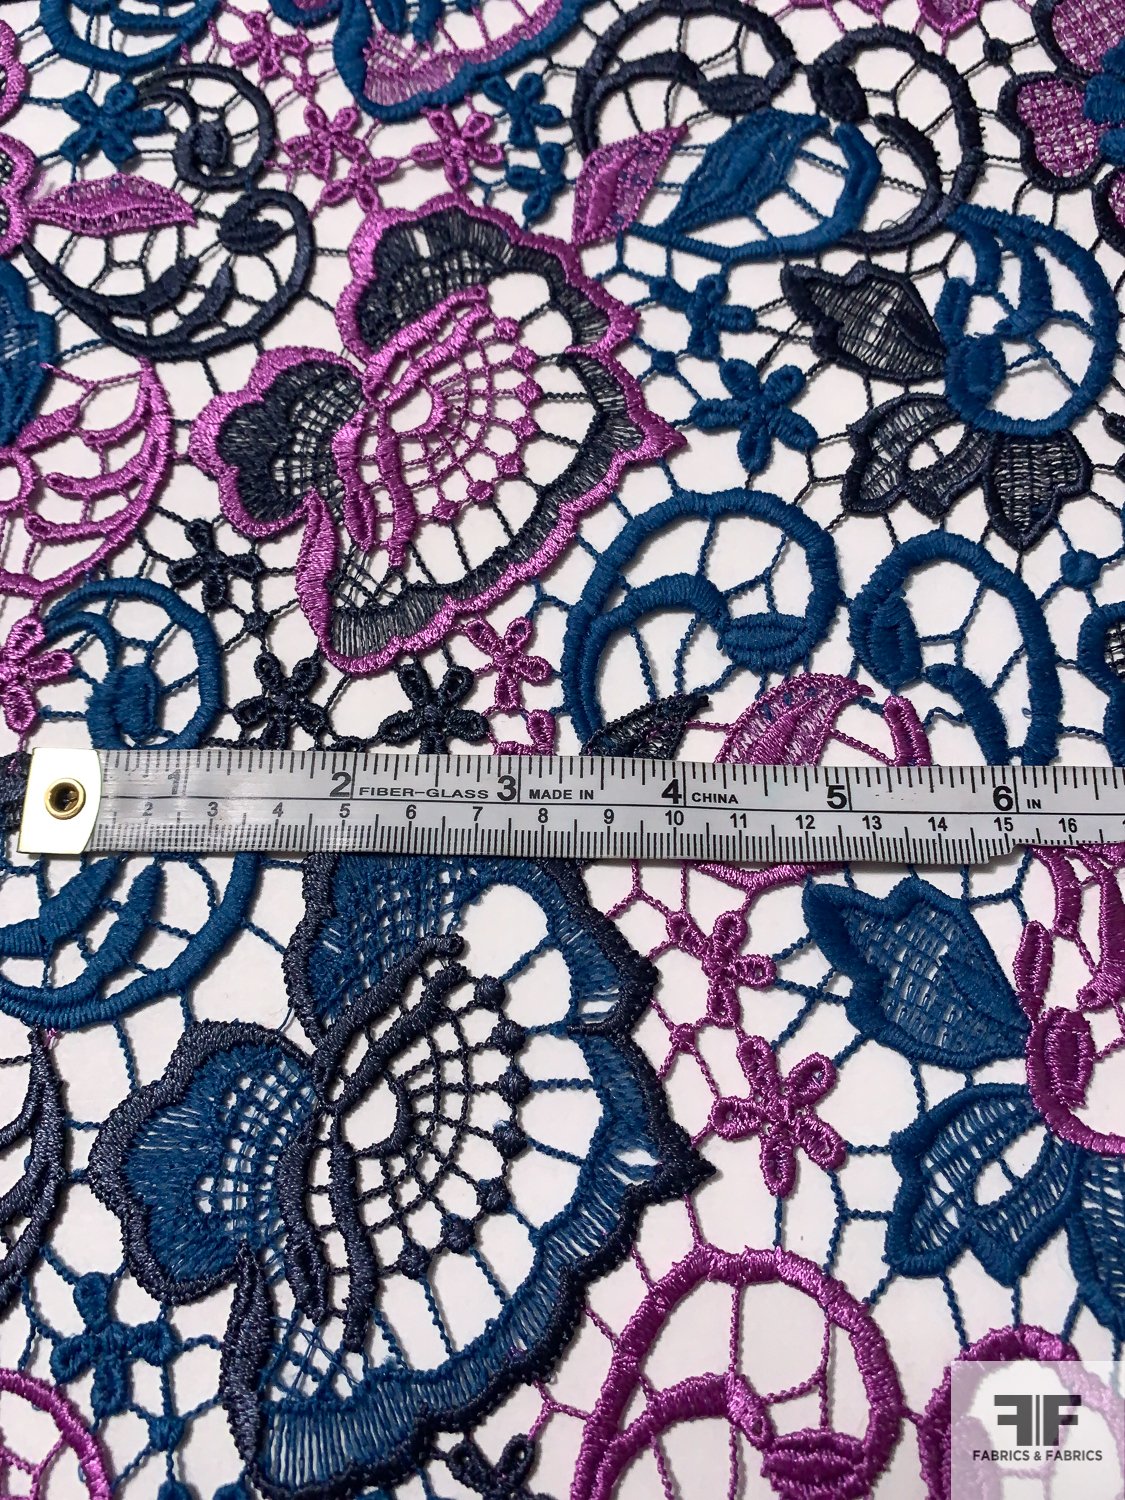 Ornate Floral Guipure Lace - Teal / Navy / Purple